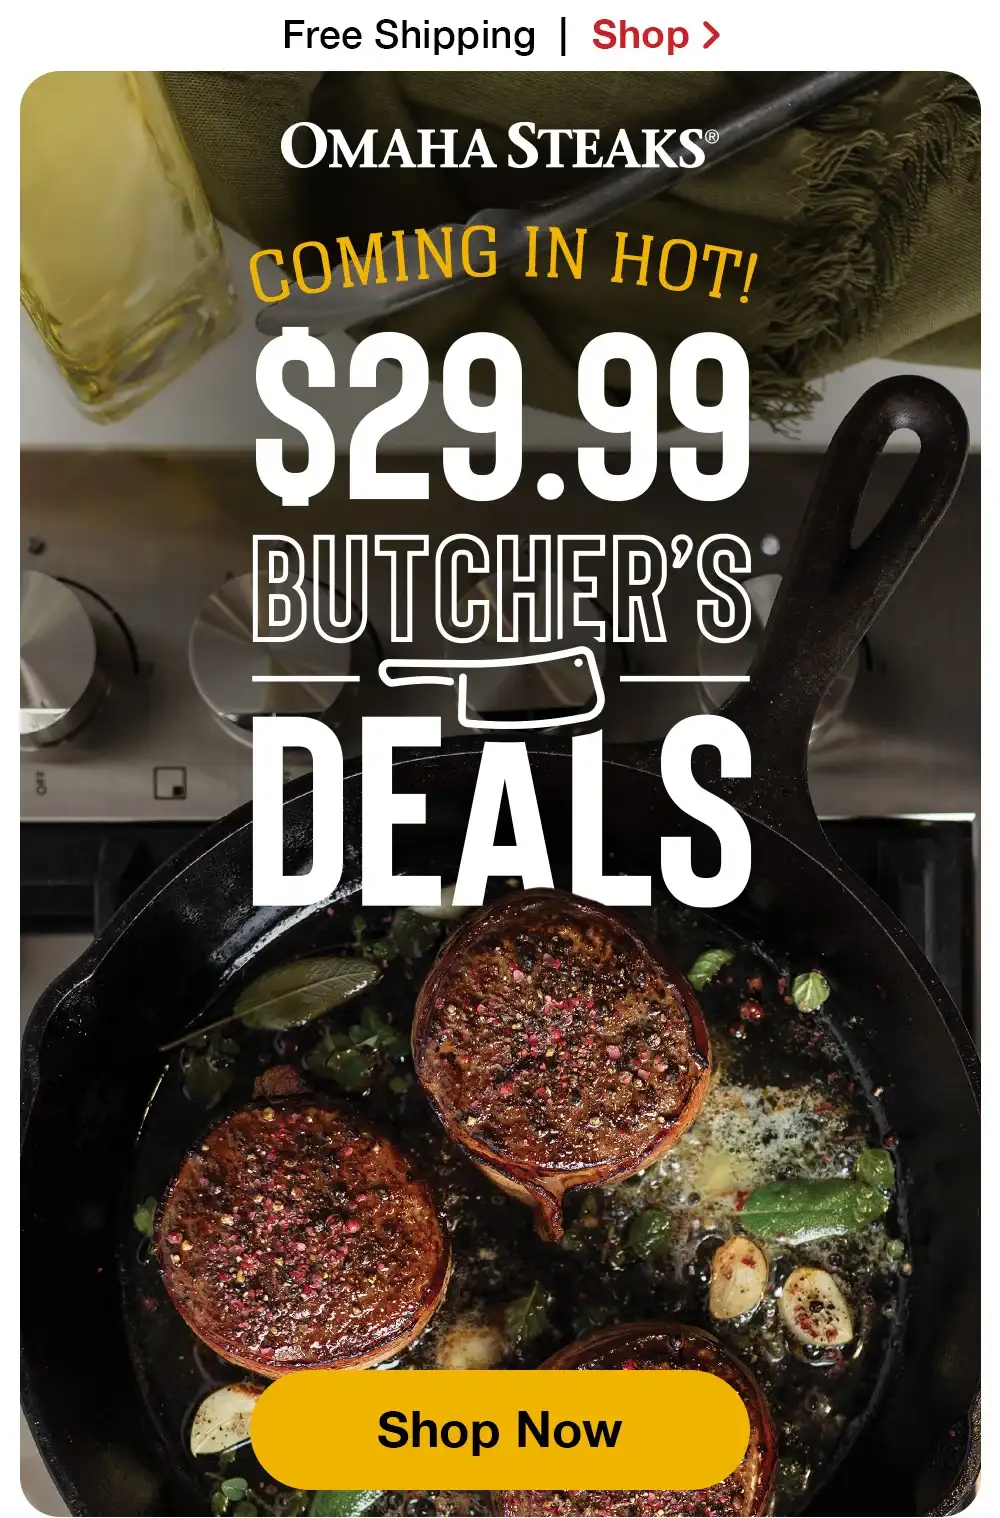 Free Shipping | Shop > OMAHA STEAKS® | COMING IN HOT! \\$29.99 BUTCHER'S DEALS || Shop Now